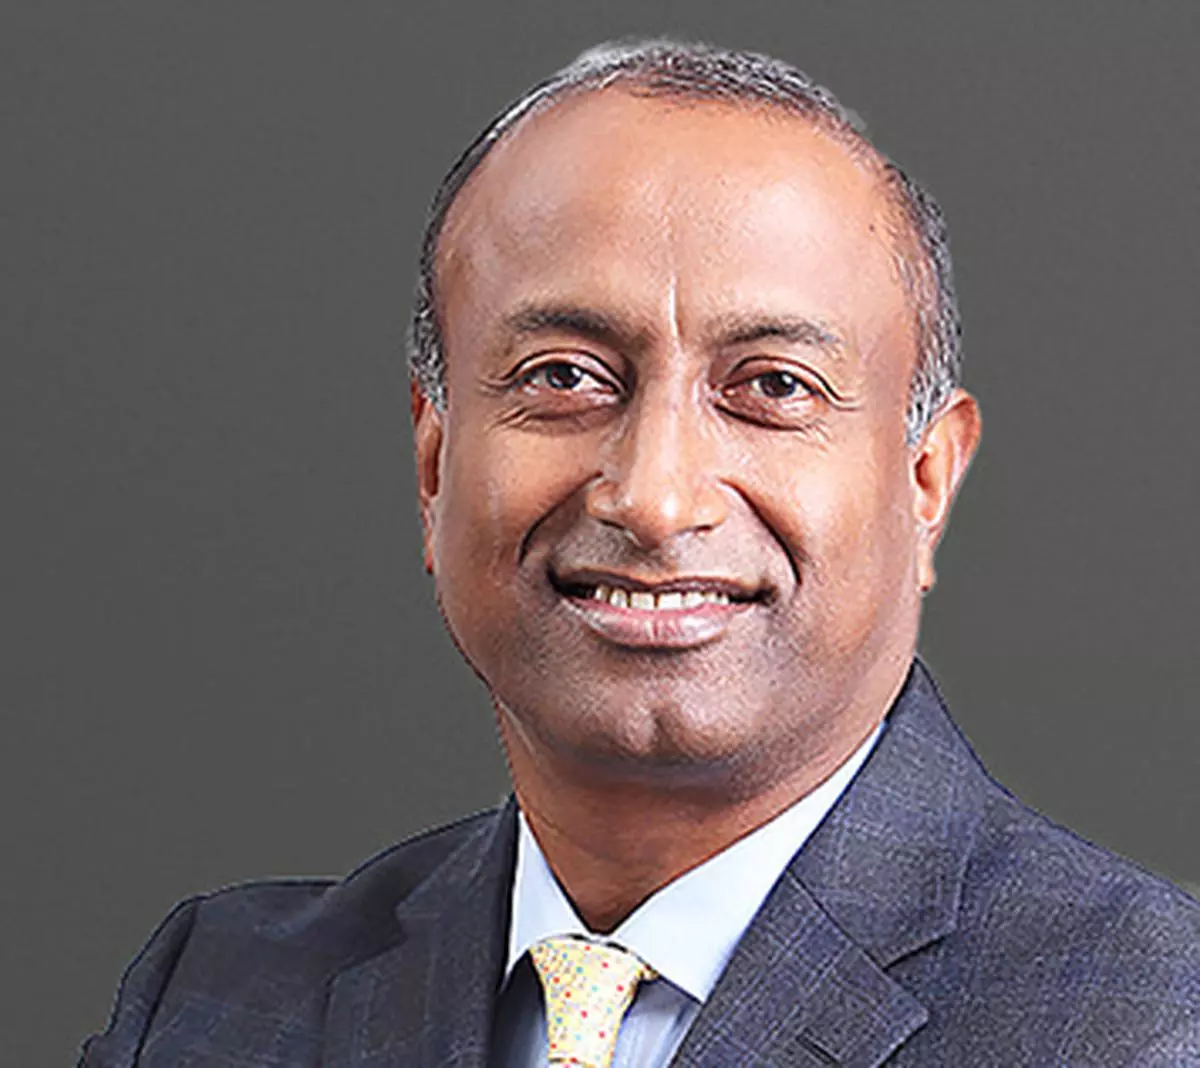 Rajesh Nambiar, Executive Vice President, Chairman and Managing Director of Cognizant India